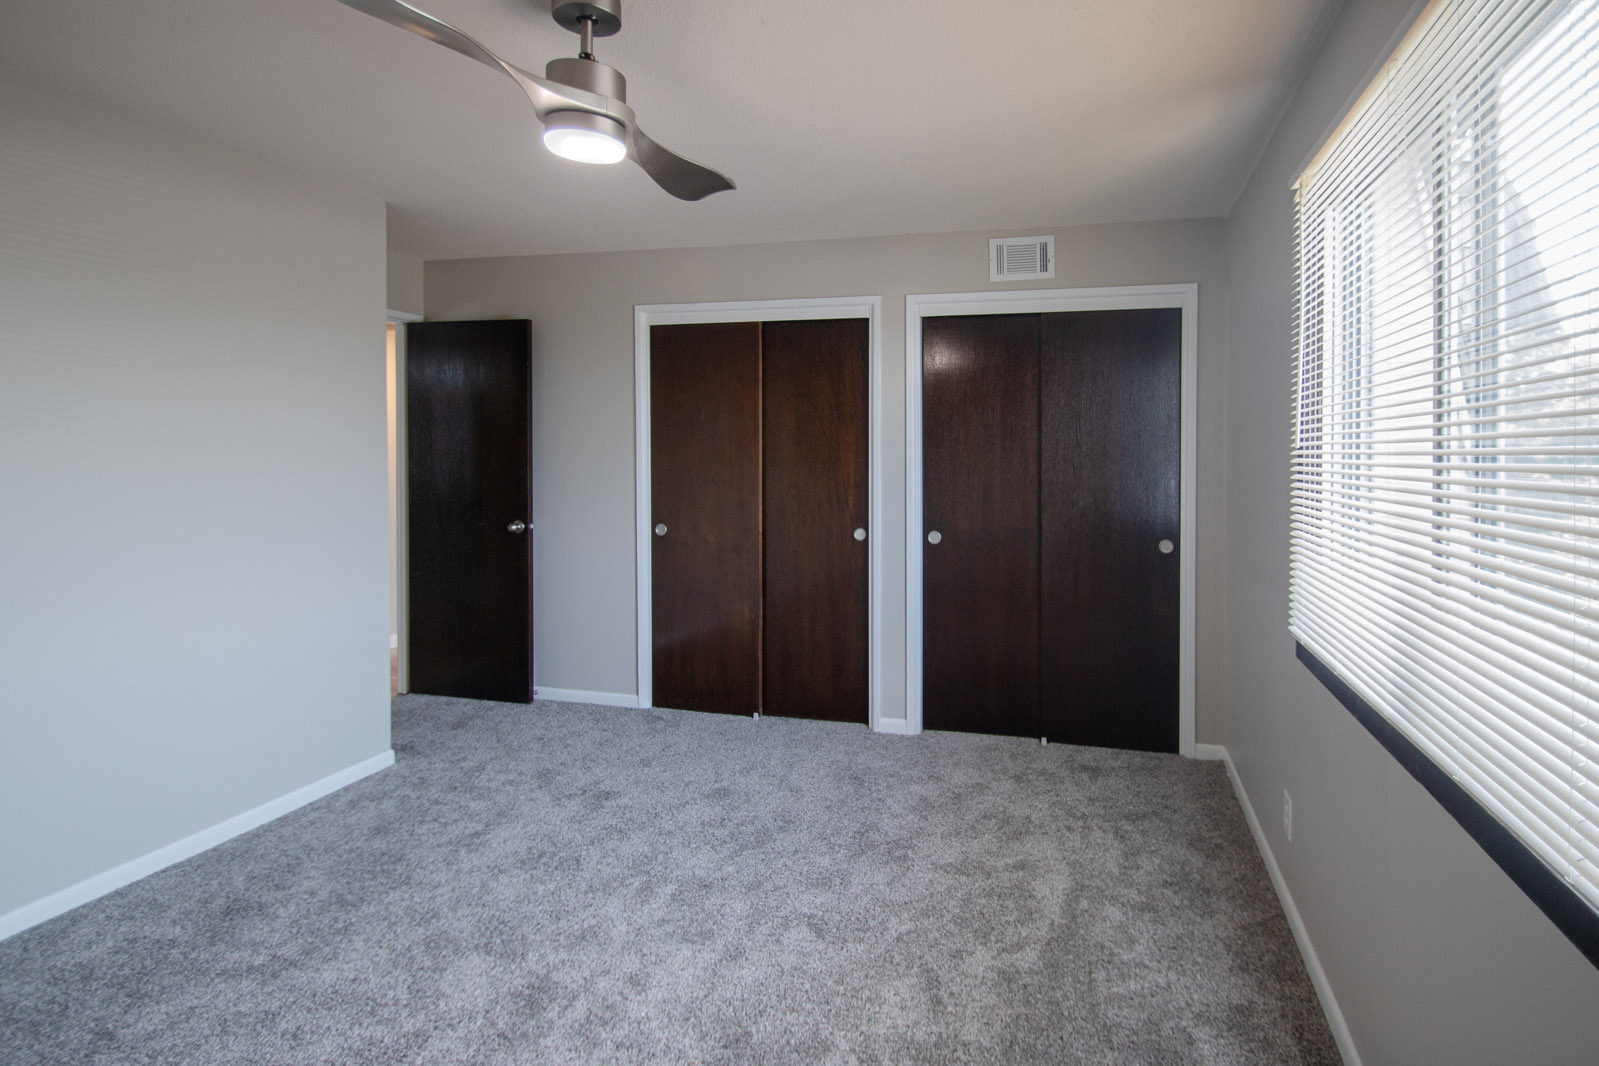 Bedrooms with Ceiling Fans at Pinehill Park Apartments in Bellevue, NE